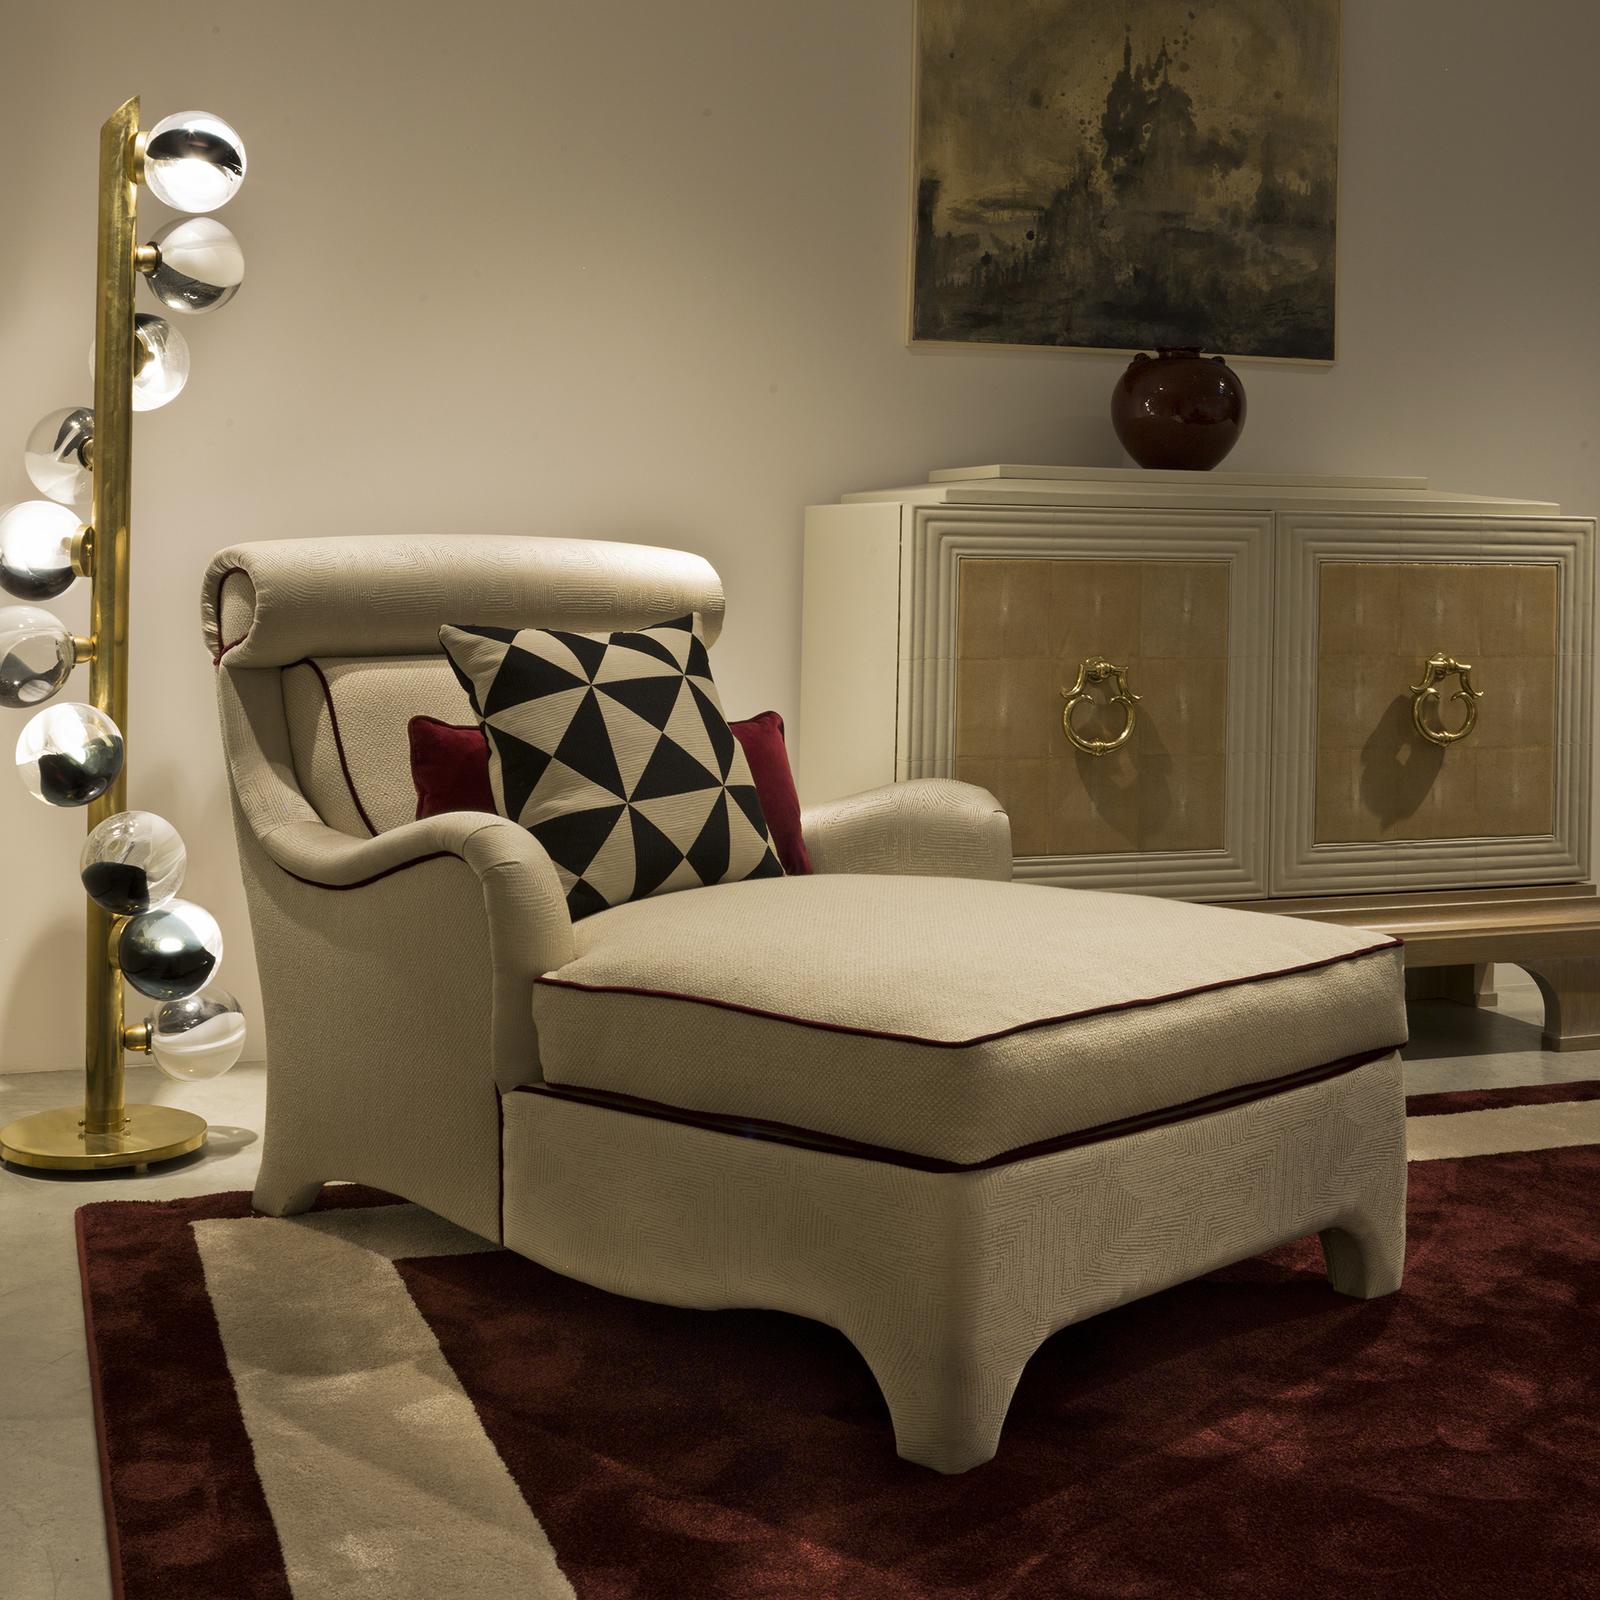 A complement to the Colette armchair, this chaise lounge will be a precious addition to a living room, patio, or study. Exuding elegance and charm, the delicate curves of its silhouette are cushioned for e comfortable seating experience. The white